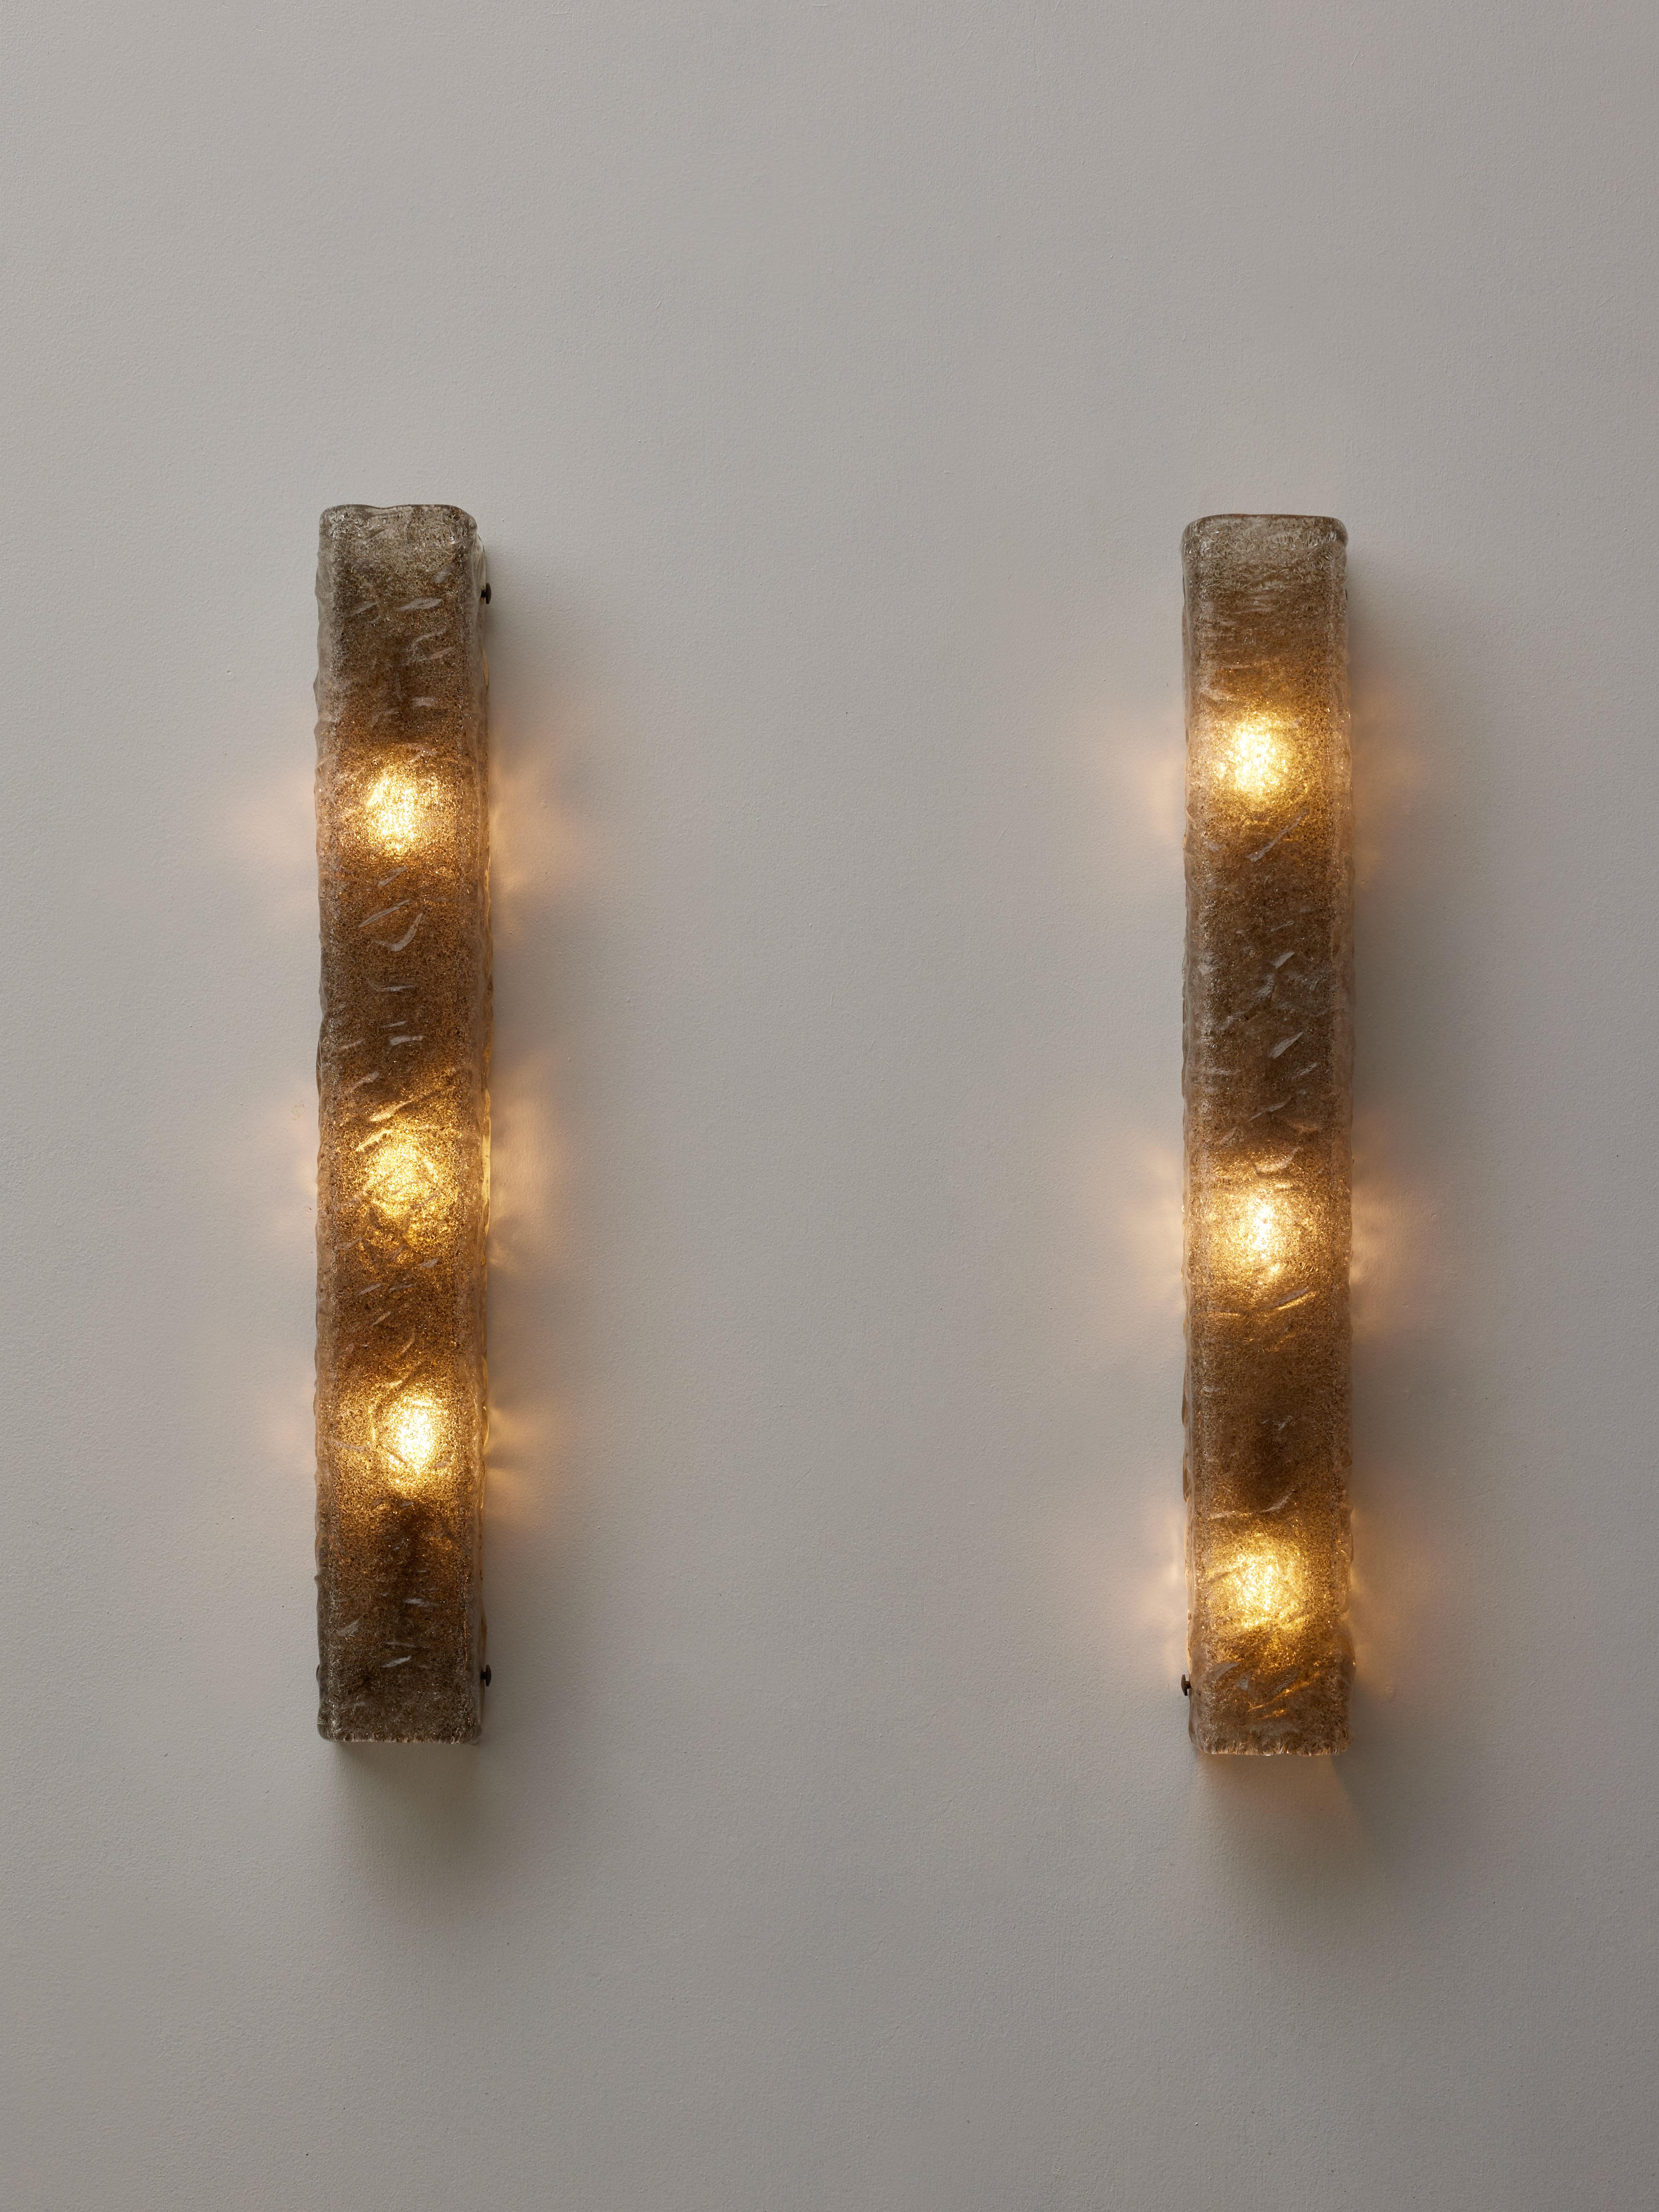 Pair of sconces in smoked Murano glass.
Creation by Studio Glustin